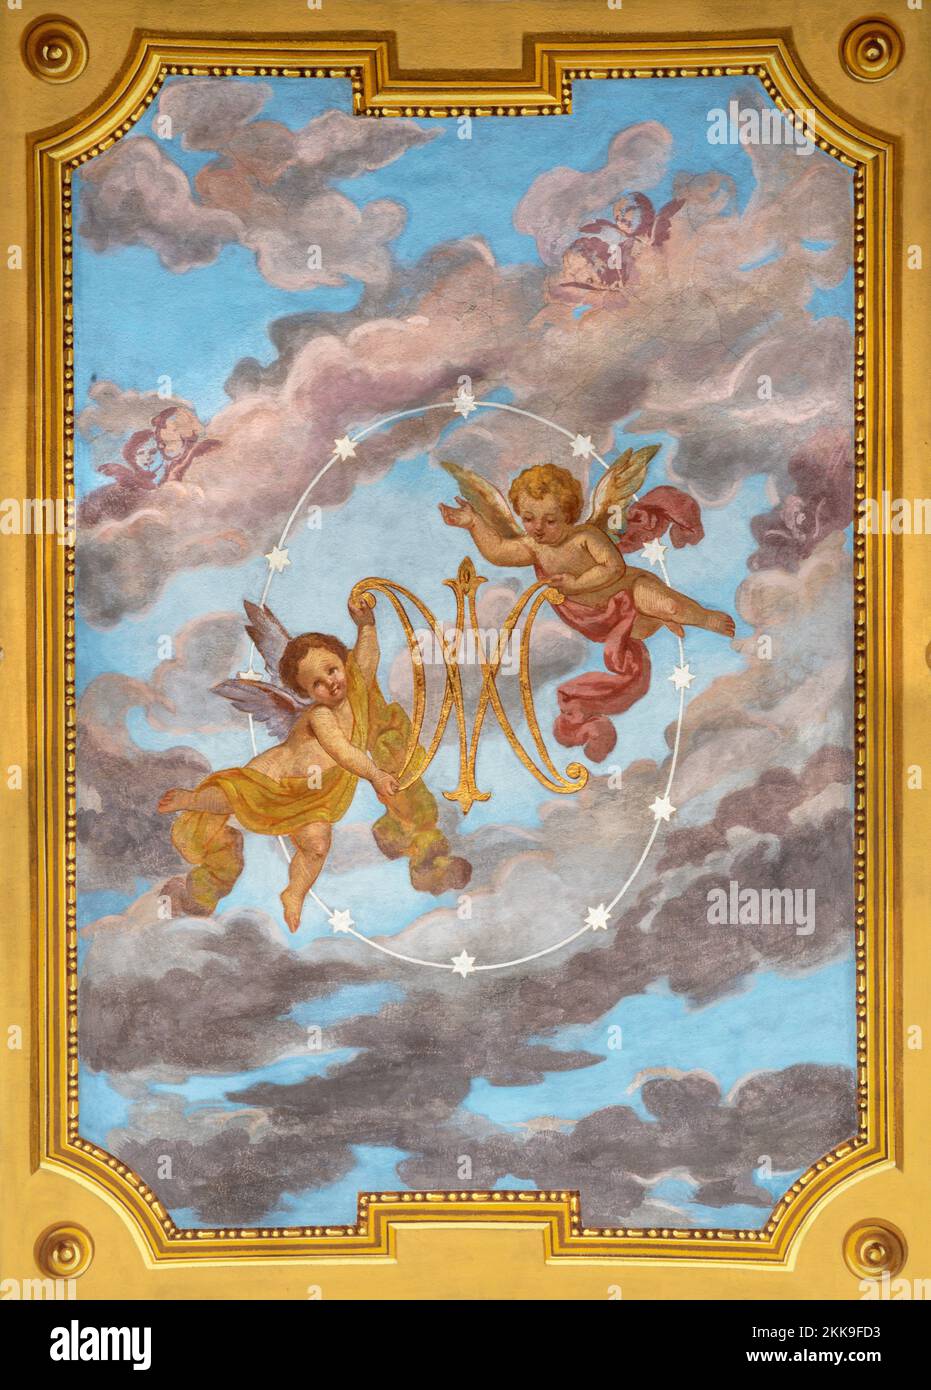 IVREA, ITALY - JULY 15, 2022: The ceiling fresco of angels with the marianic initials in the church Chiesa di San Salvatore by G. Silvestro (1914). Stock Photo